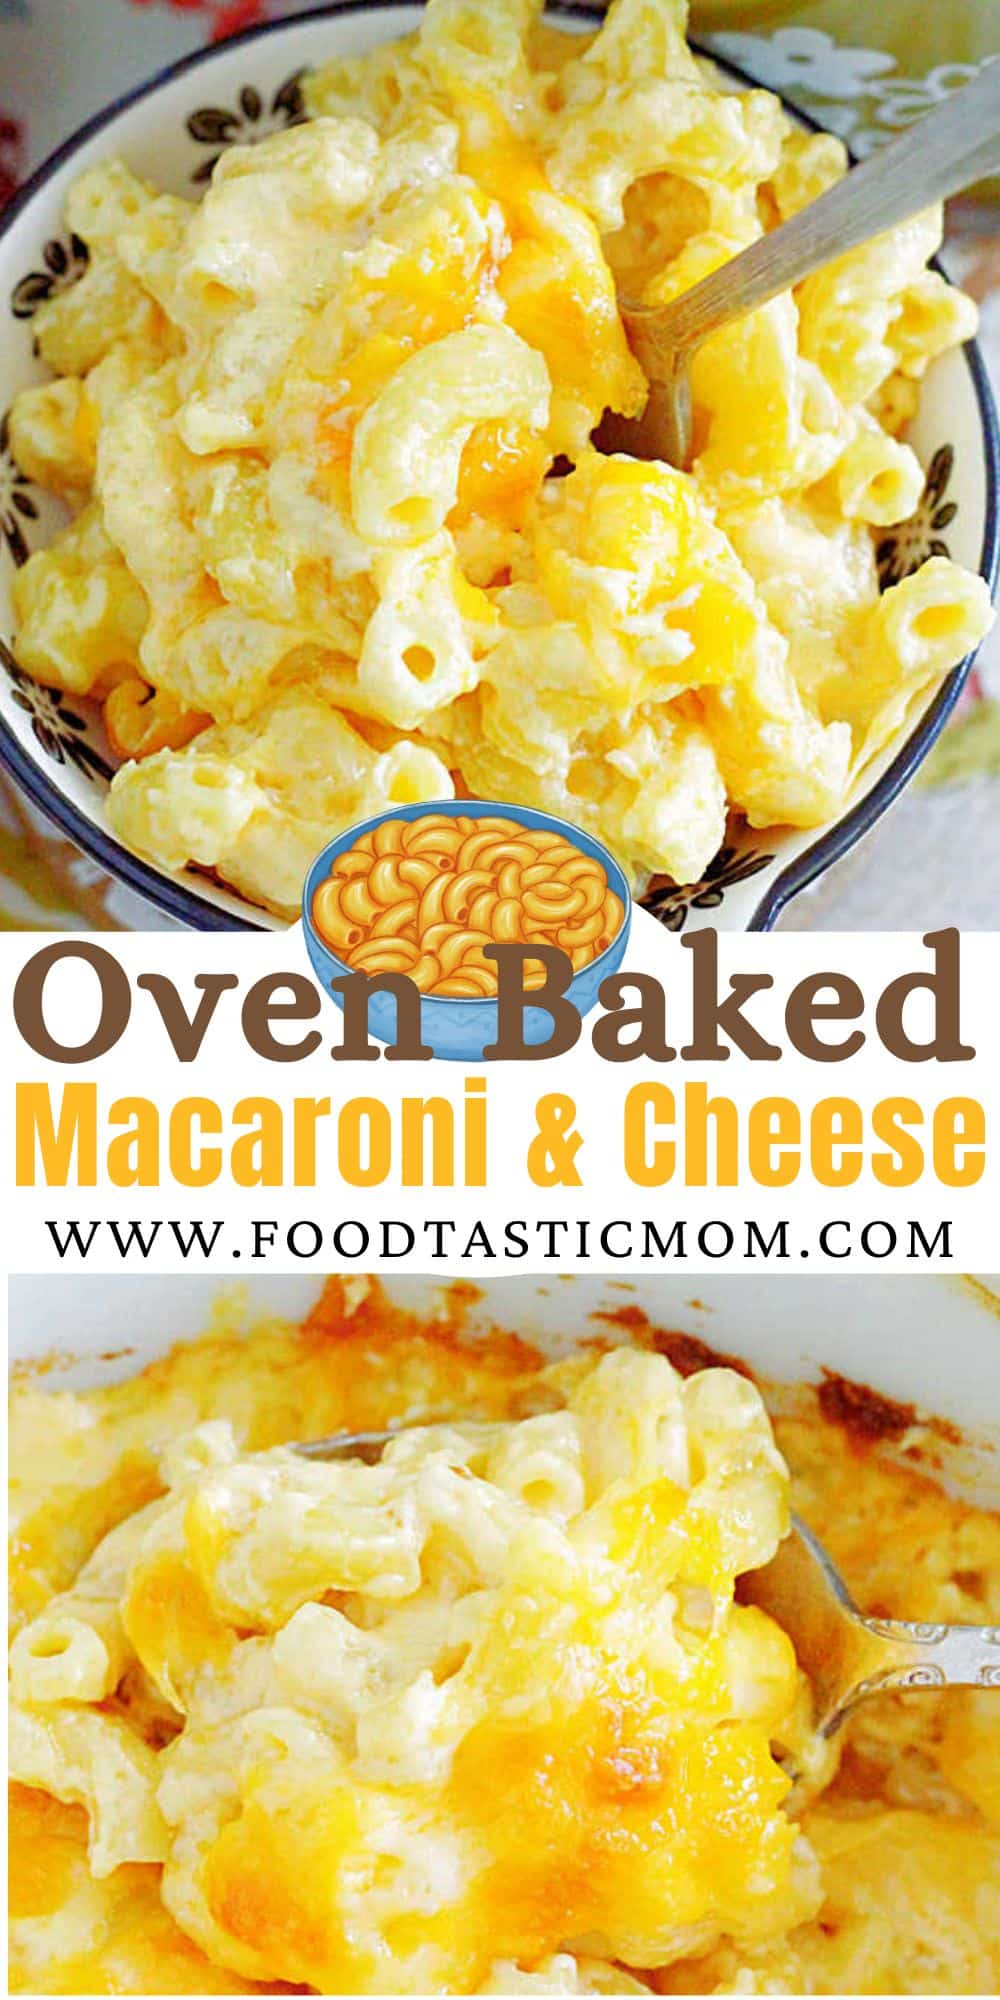 Oven Baked Macaroni and Cheese is my go-to recipe because the oven does all the work. No boiling the macaroni pasta before hand. via @foodtasticmom